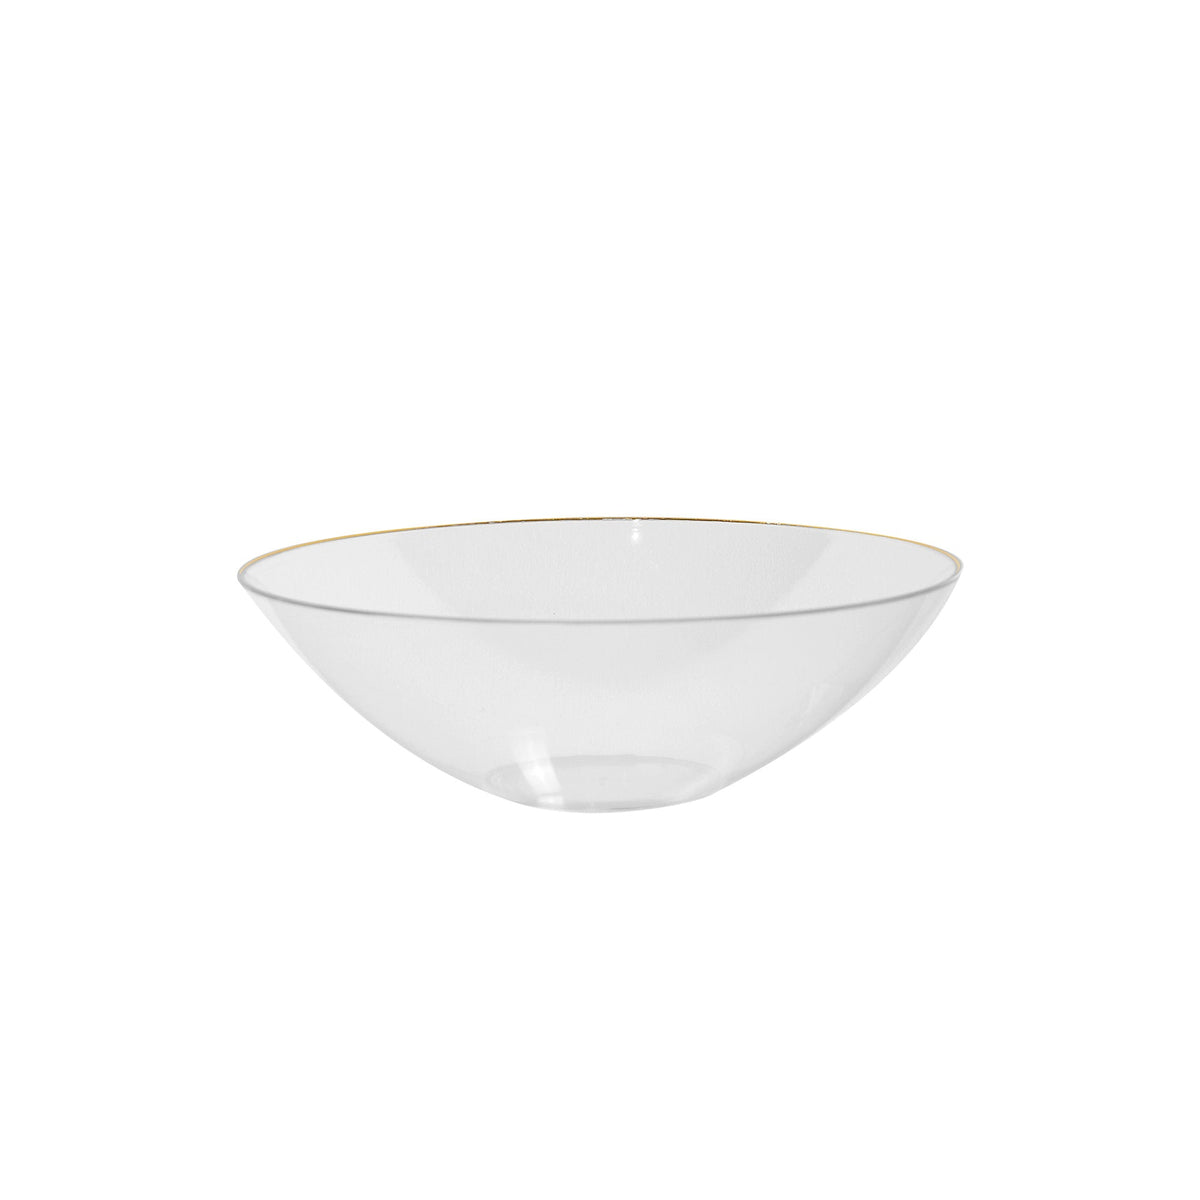 MADISON IMPORTS Disposable-Plasticware Premium Quality Round Clear Soupbowl with Gold Rim, 16 oz, 10 Count 775310996168